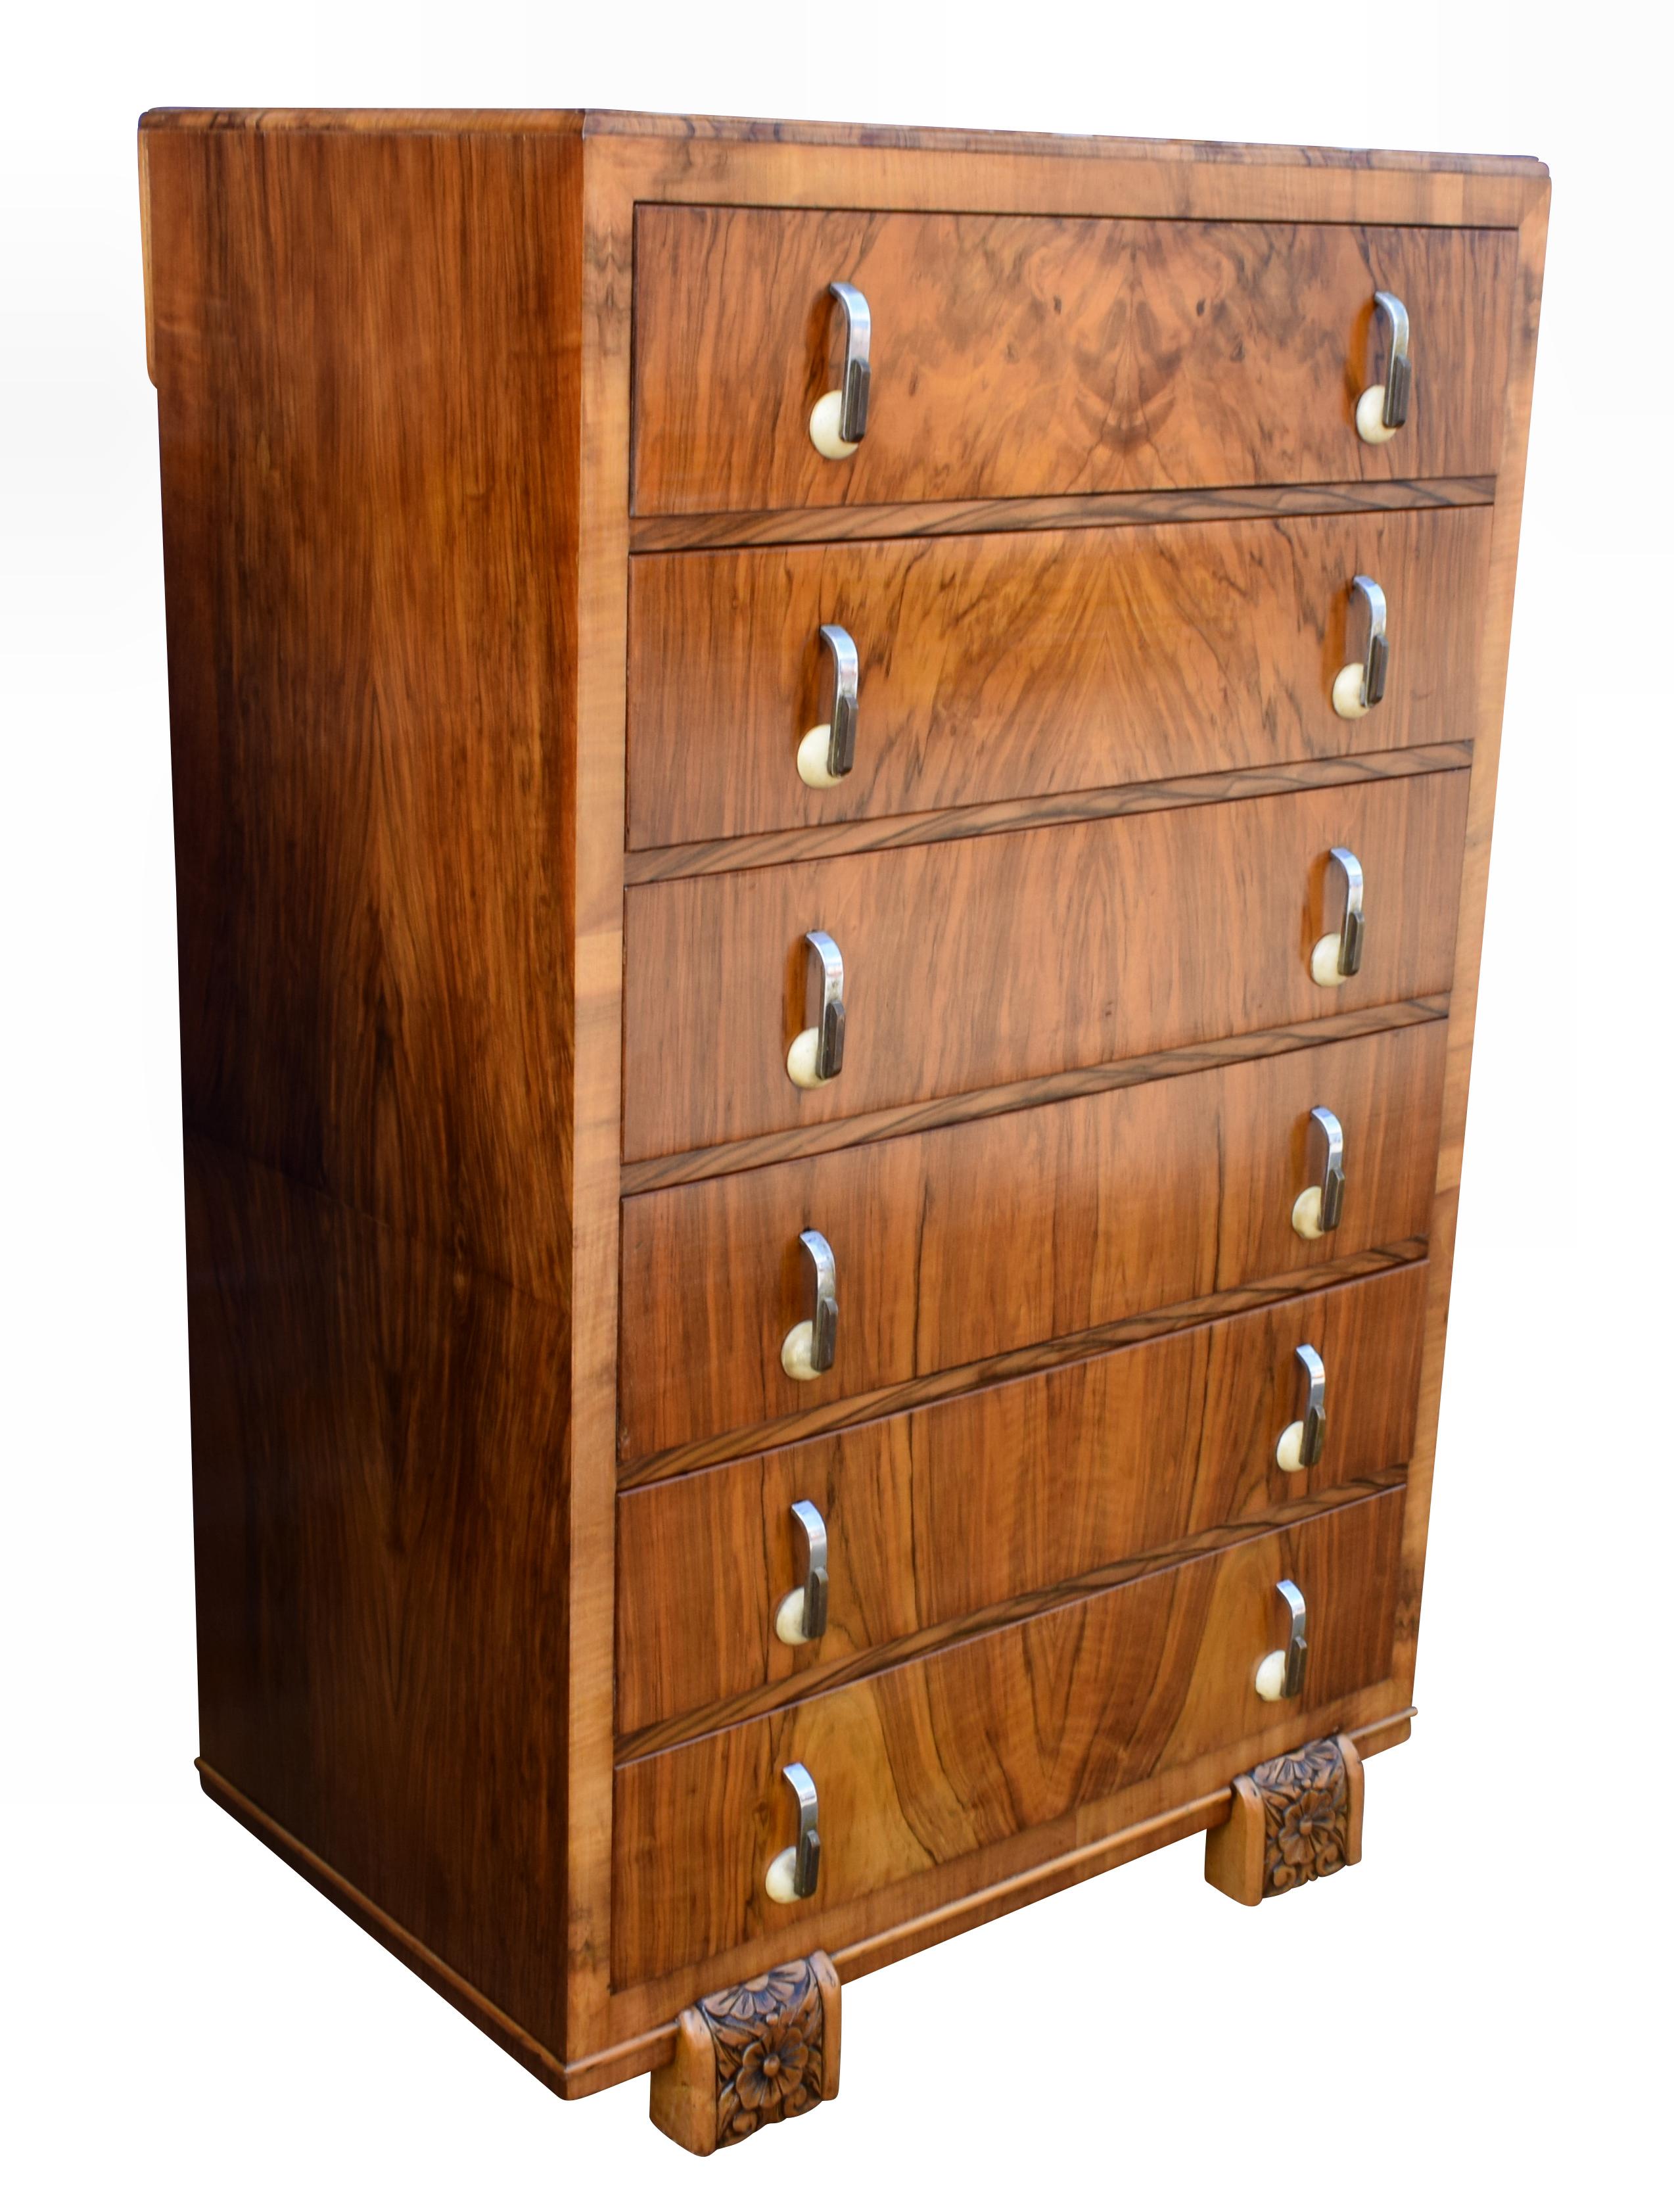 Very stylish Art Deco walnut chest of drawers originating from England and dating to the 1930s. It has stunning walnut veneers and great original Art Deco handles. This is a great size for a period or modern home. We've had this piece fully restored